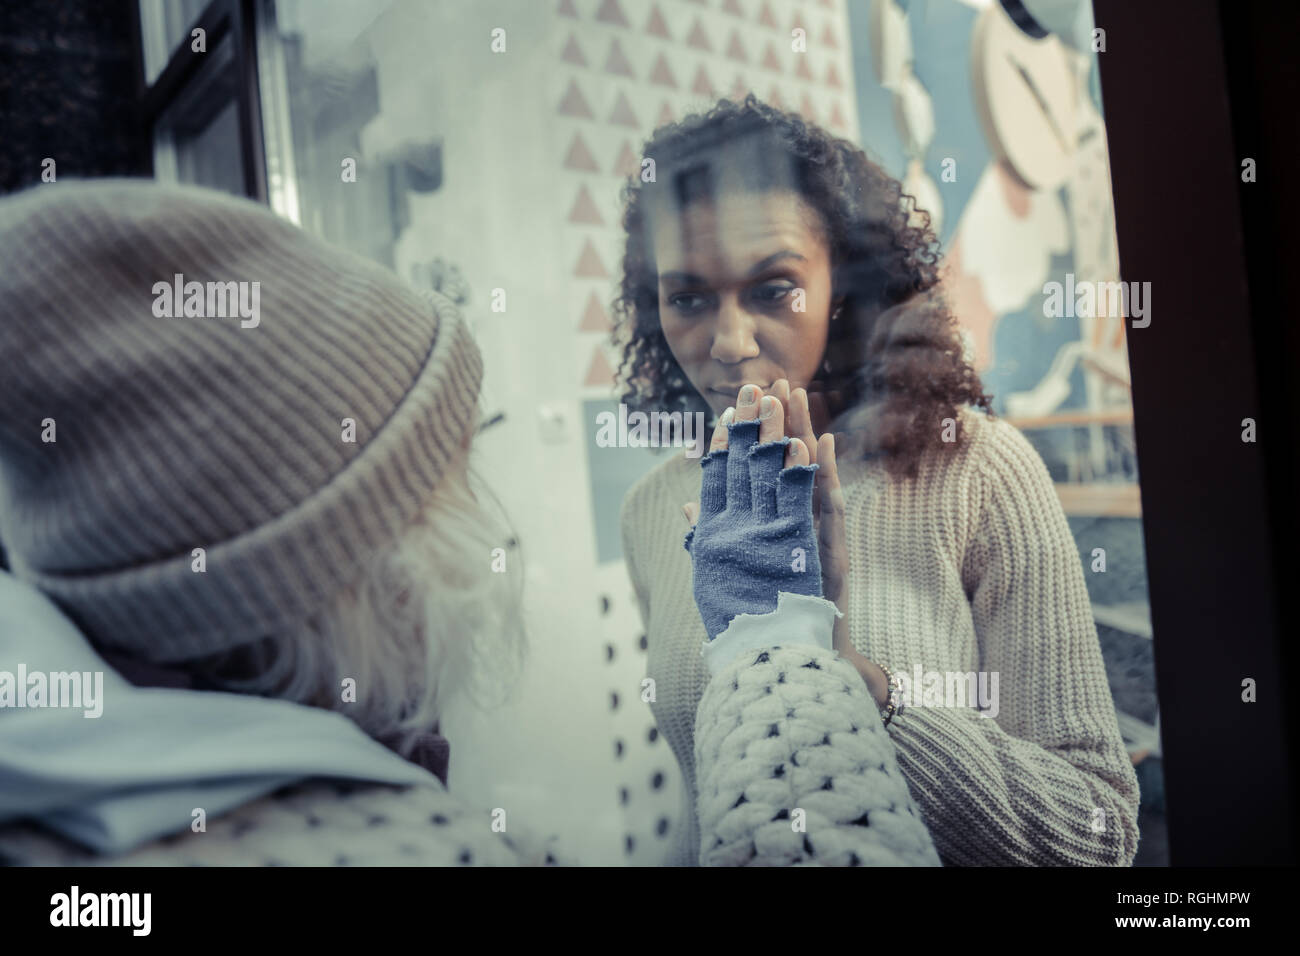 Nice young woman opening the door of cafeteria Stock Photo